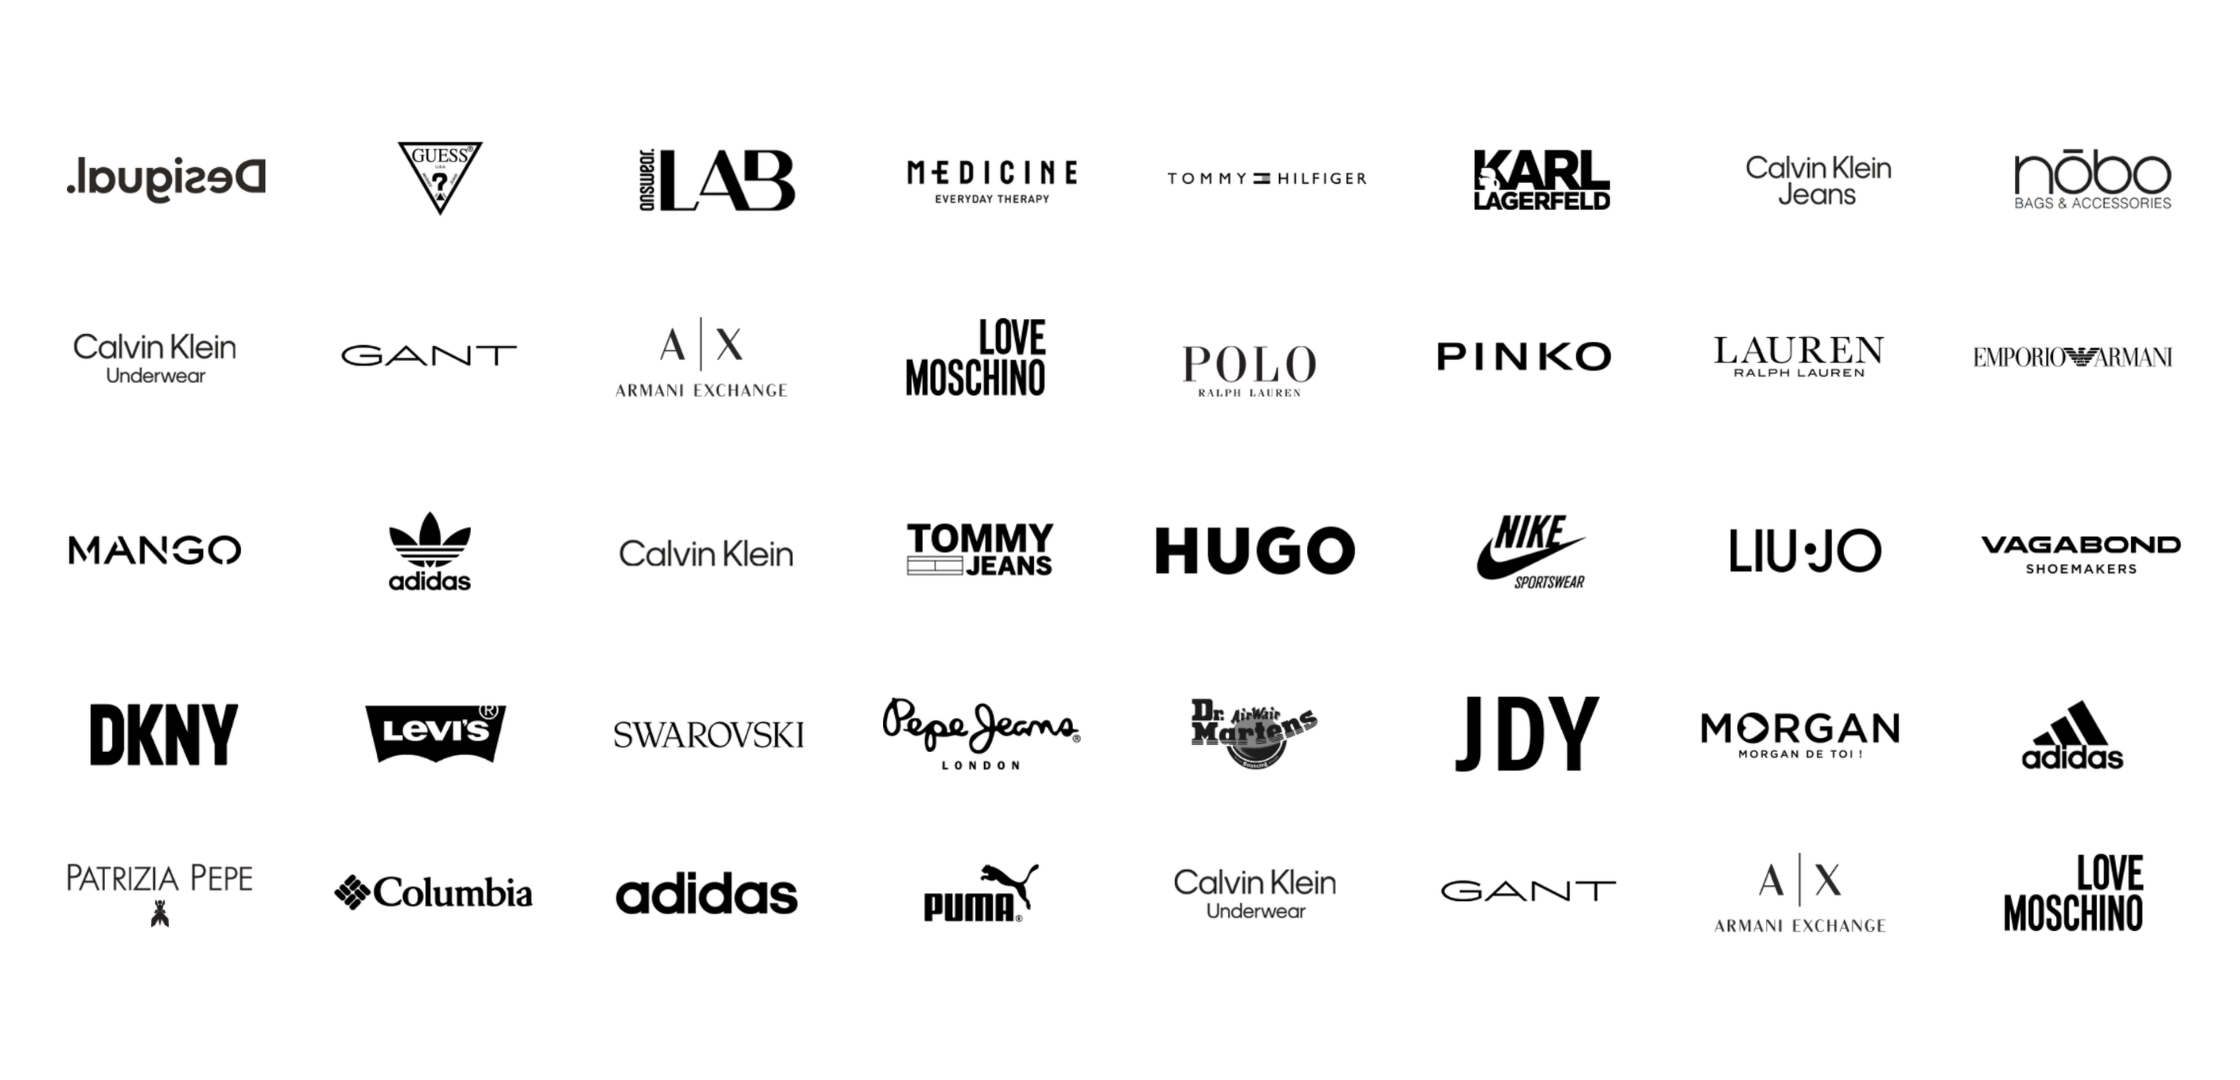 Brands cross-presented in outfits by getdressed AI technology, brands available on Answear.com: